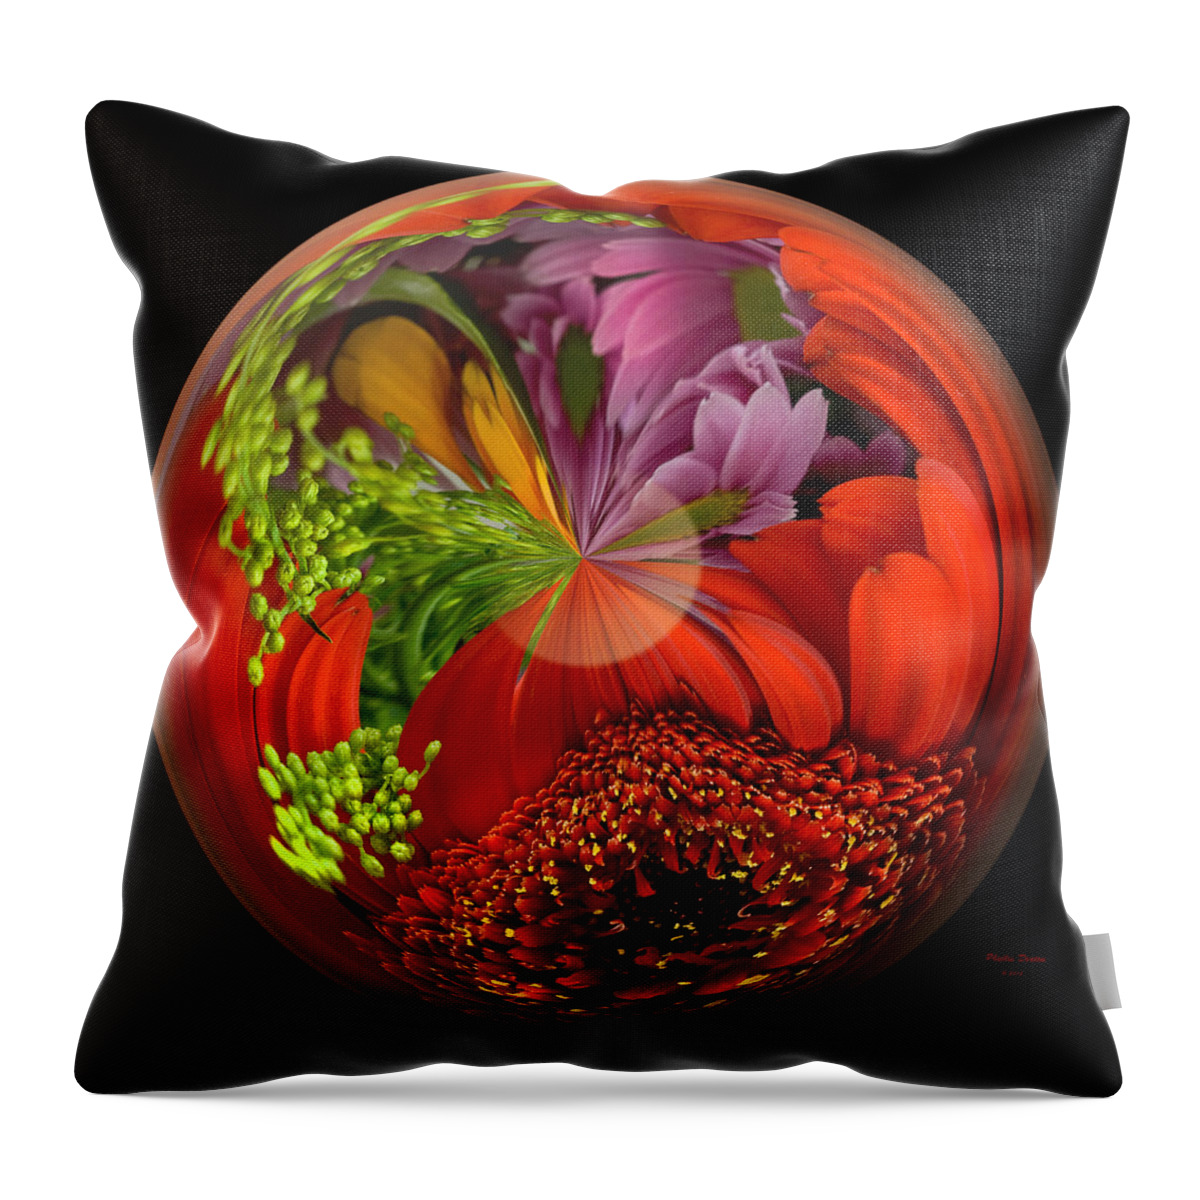 Flowers Throw Pillow featuring the photograph Daisy Bouquet In A Globe by Phyllis Denton